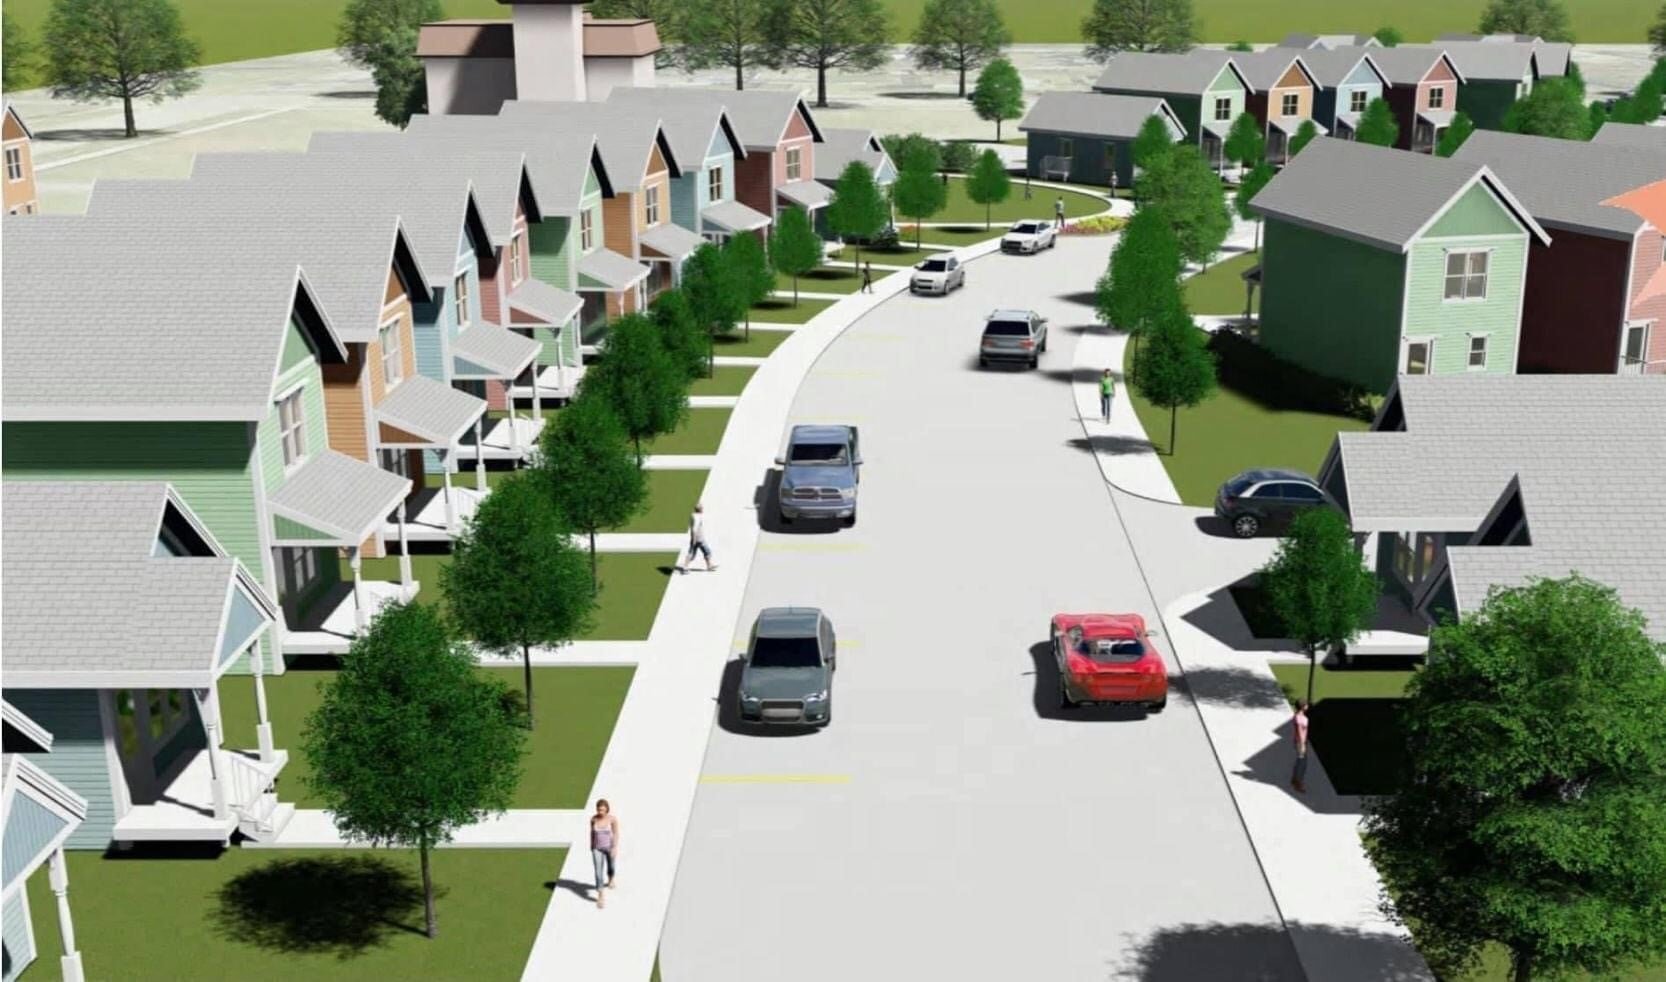 Public input sought on proposed affordable housing development in Ypsilanti image photo